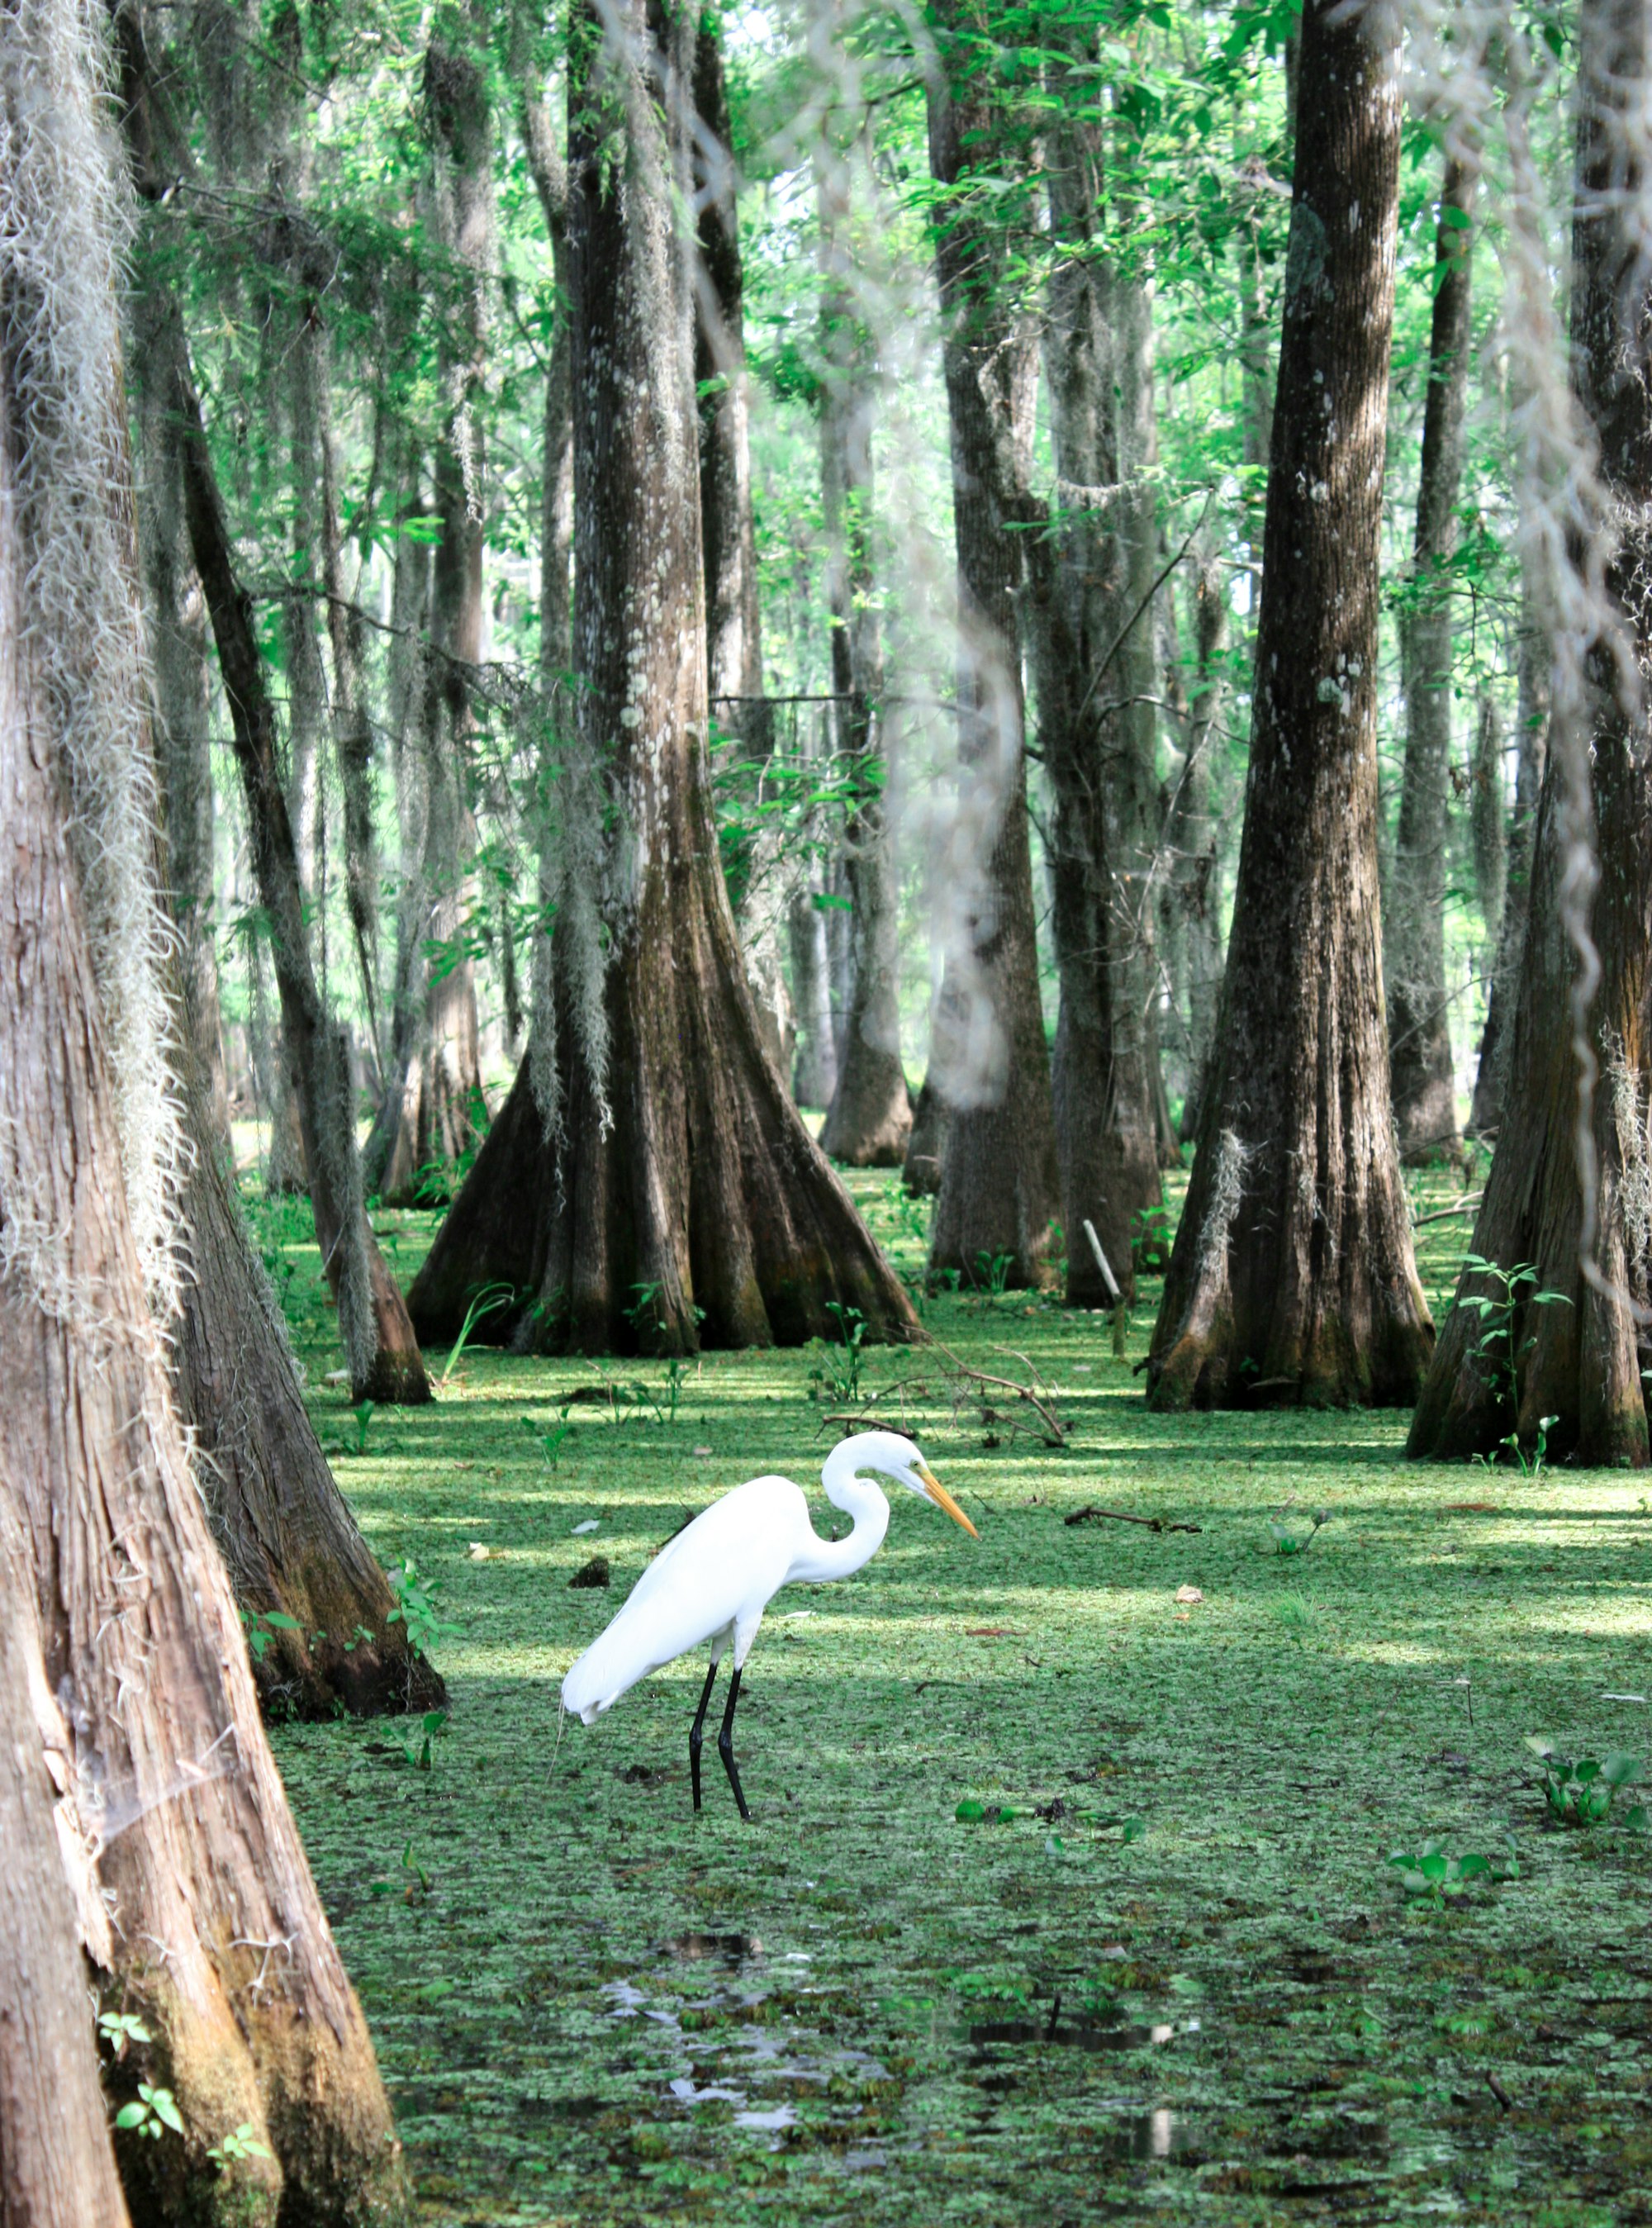 An egret bird in the swamp, at the Lake Martin